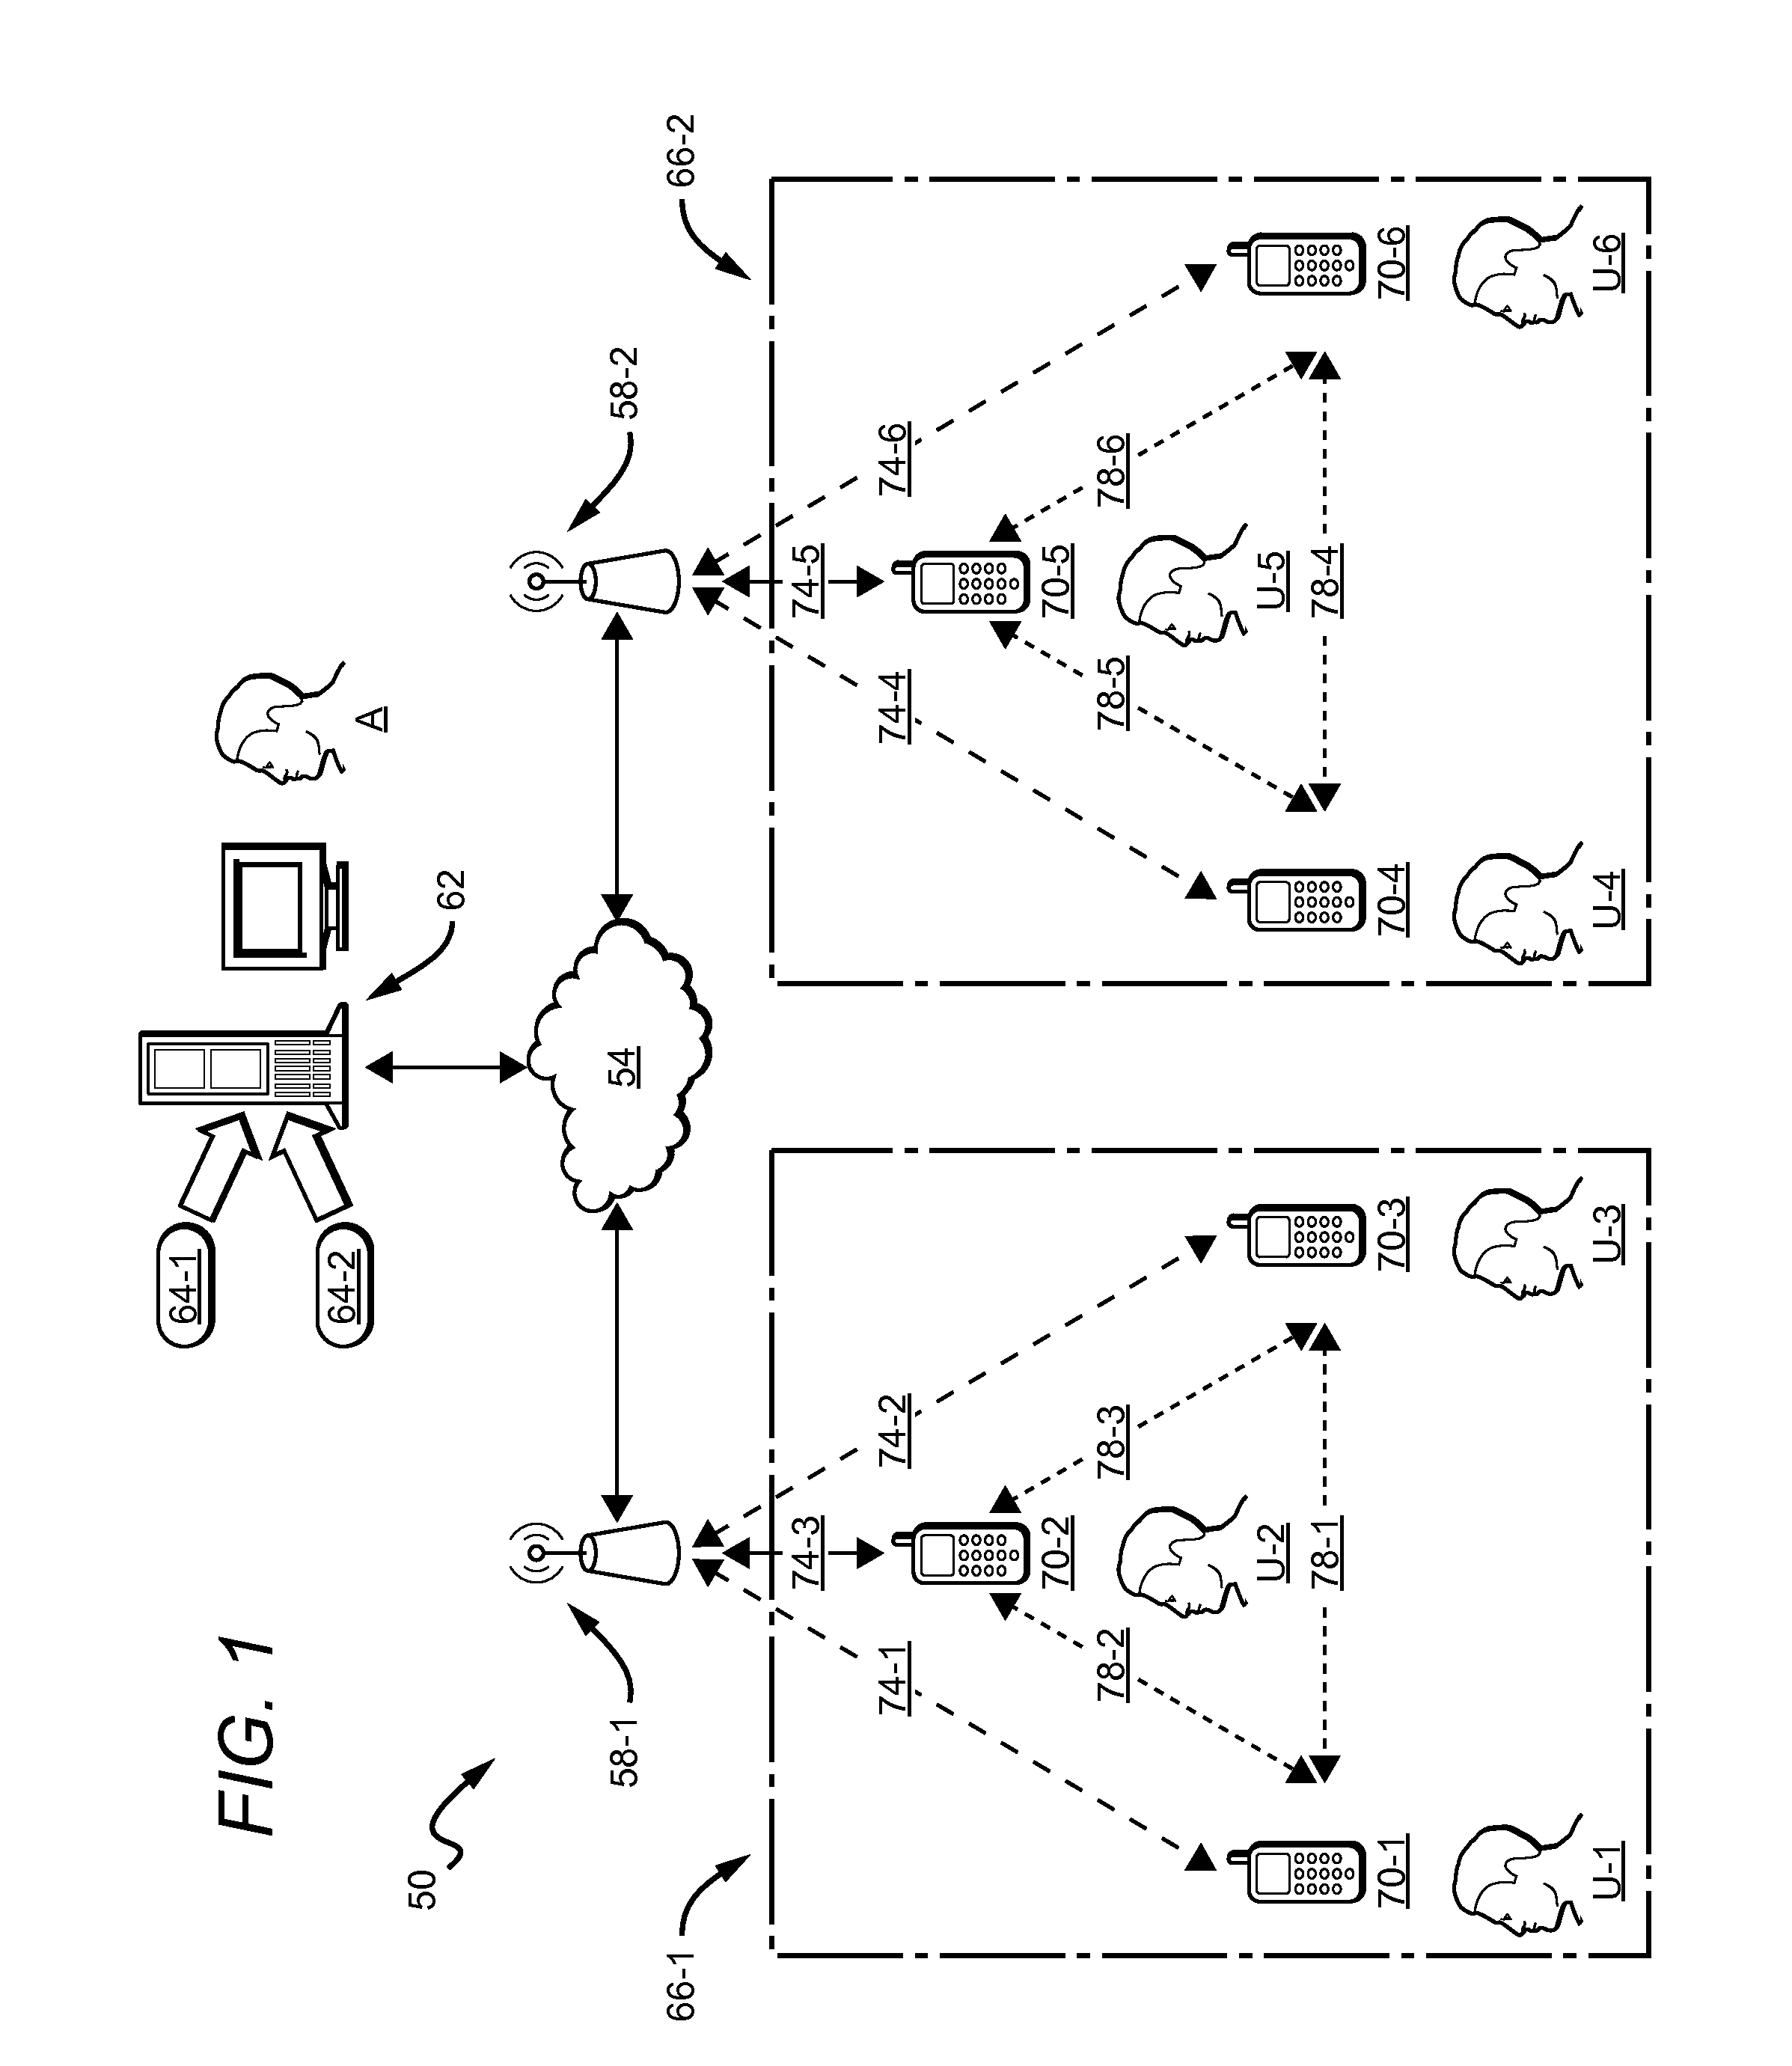 Method, Apparatus and System for Social Networking